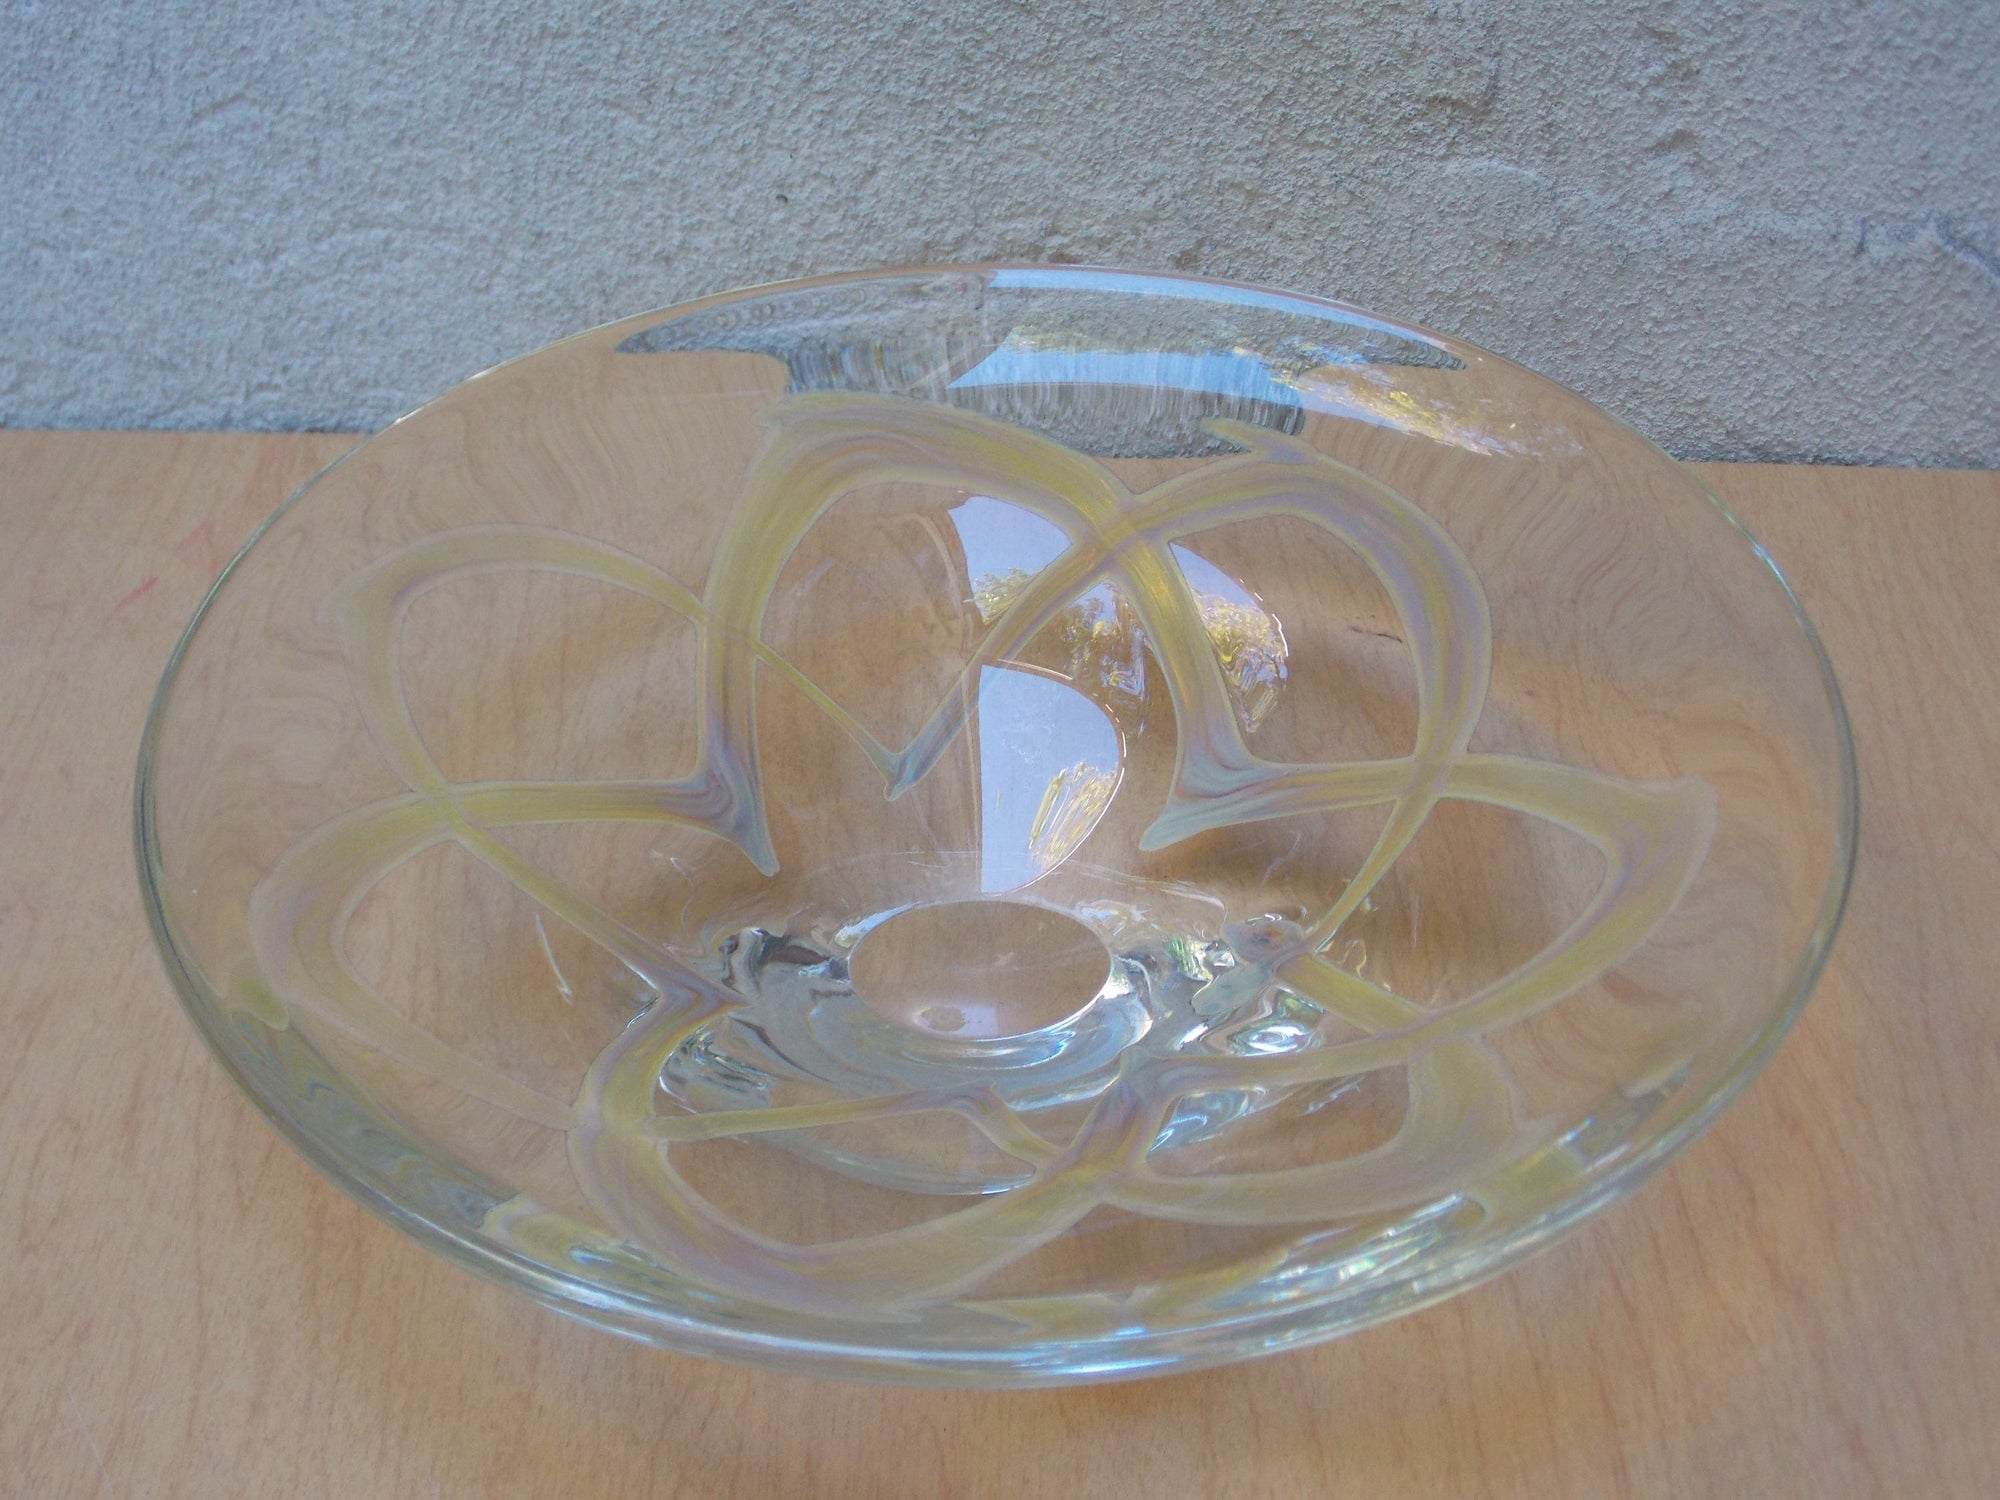 I Like Mikes Mid Century Modern Bowls Heavy Decorative Glass Fruit Bowl with Star Design, Murano Style